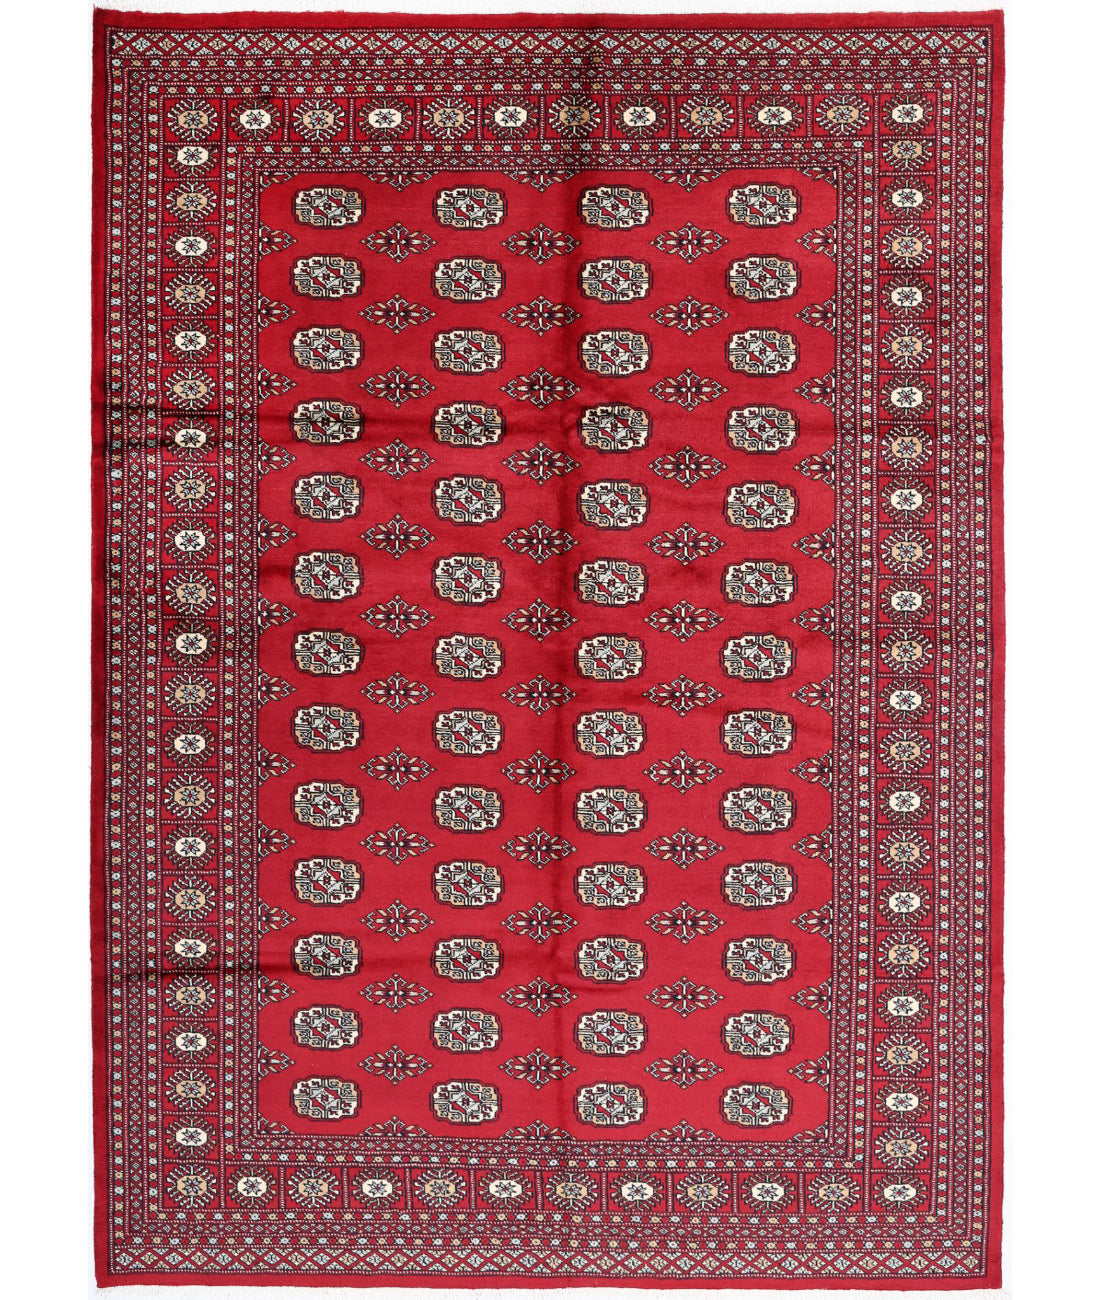 Hand Knotted Tribal Bokhara Wool Rug - 6&#39;2&#39;&#39; x 8&#39;9&#39;&#39; 6&#39;2&#39;&#39; x 8&#39;9&#39;&#39; (185 X 263) / Red / Black